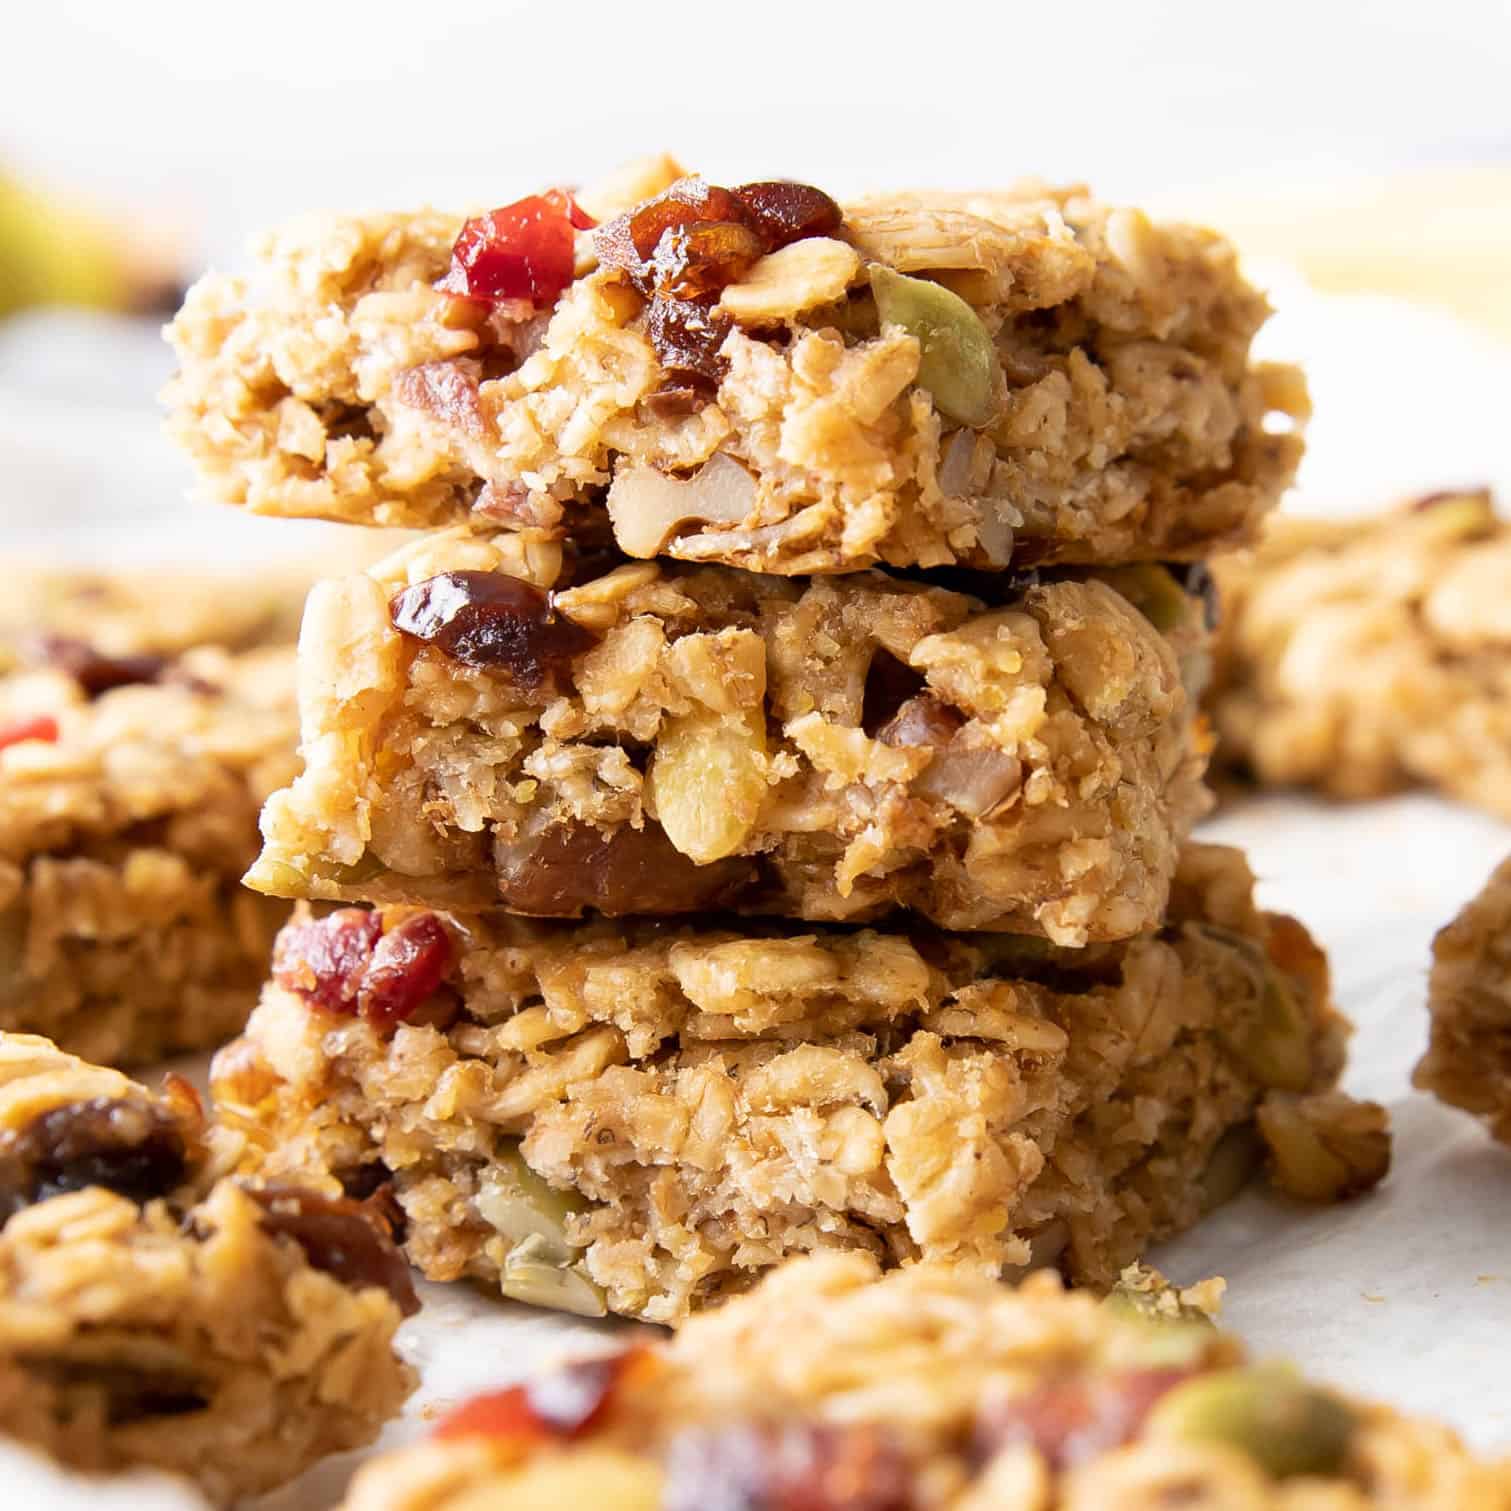 Healthy breakfast bars recipe featured image